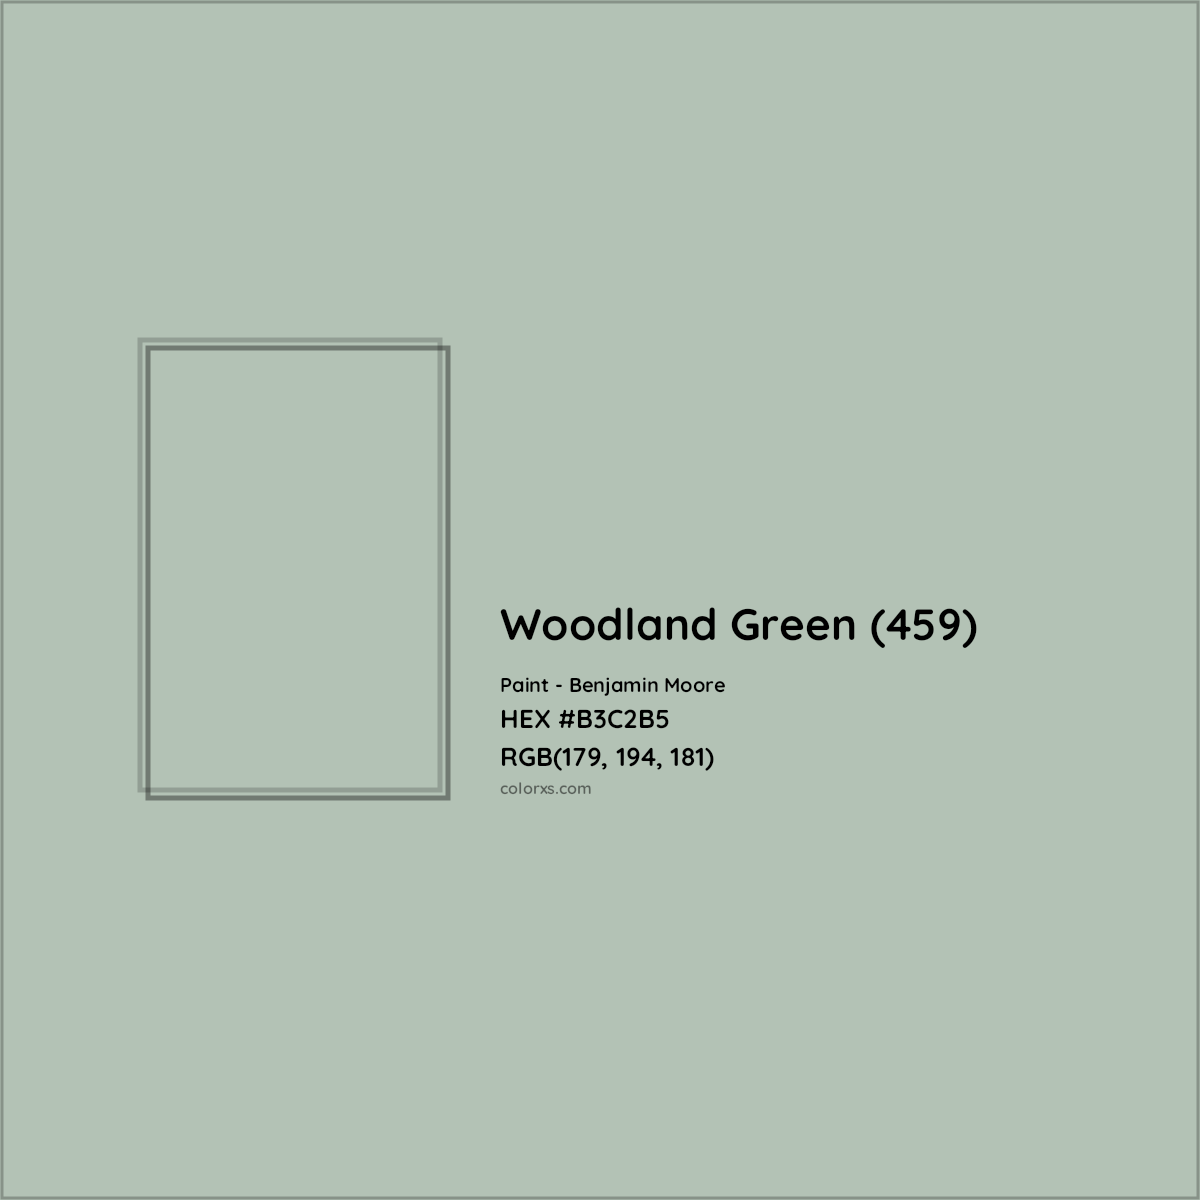 Benjamin Moore Woodland Green (459) Paint color codes, similar paints and  colors 